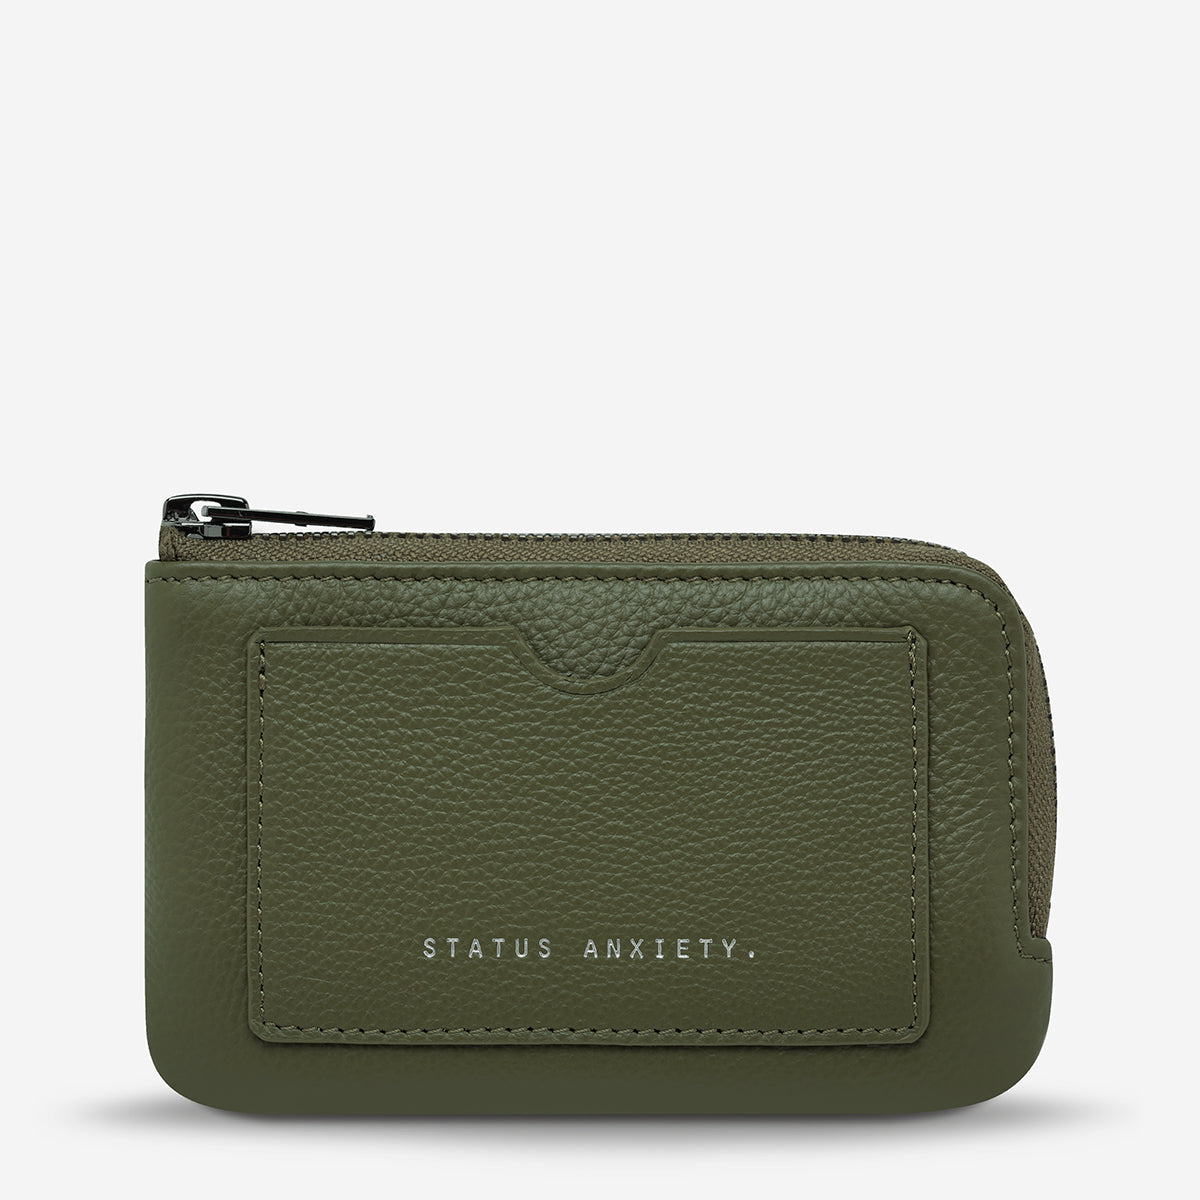 Status Anxiety - Left Behind Pouch - Khaki